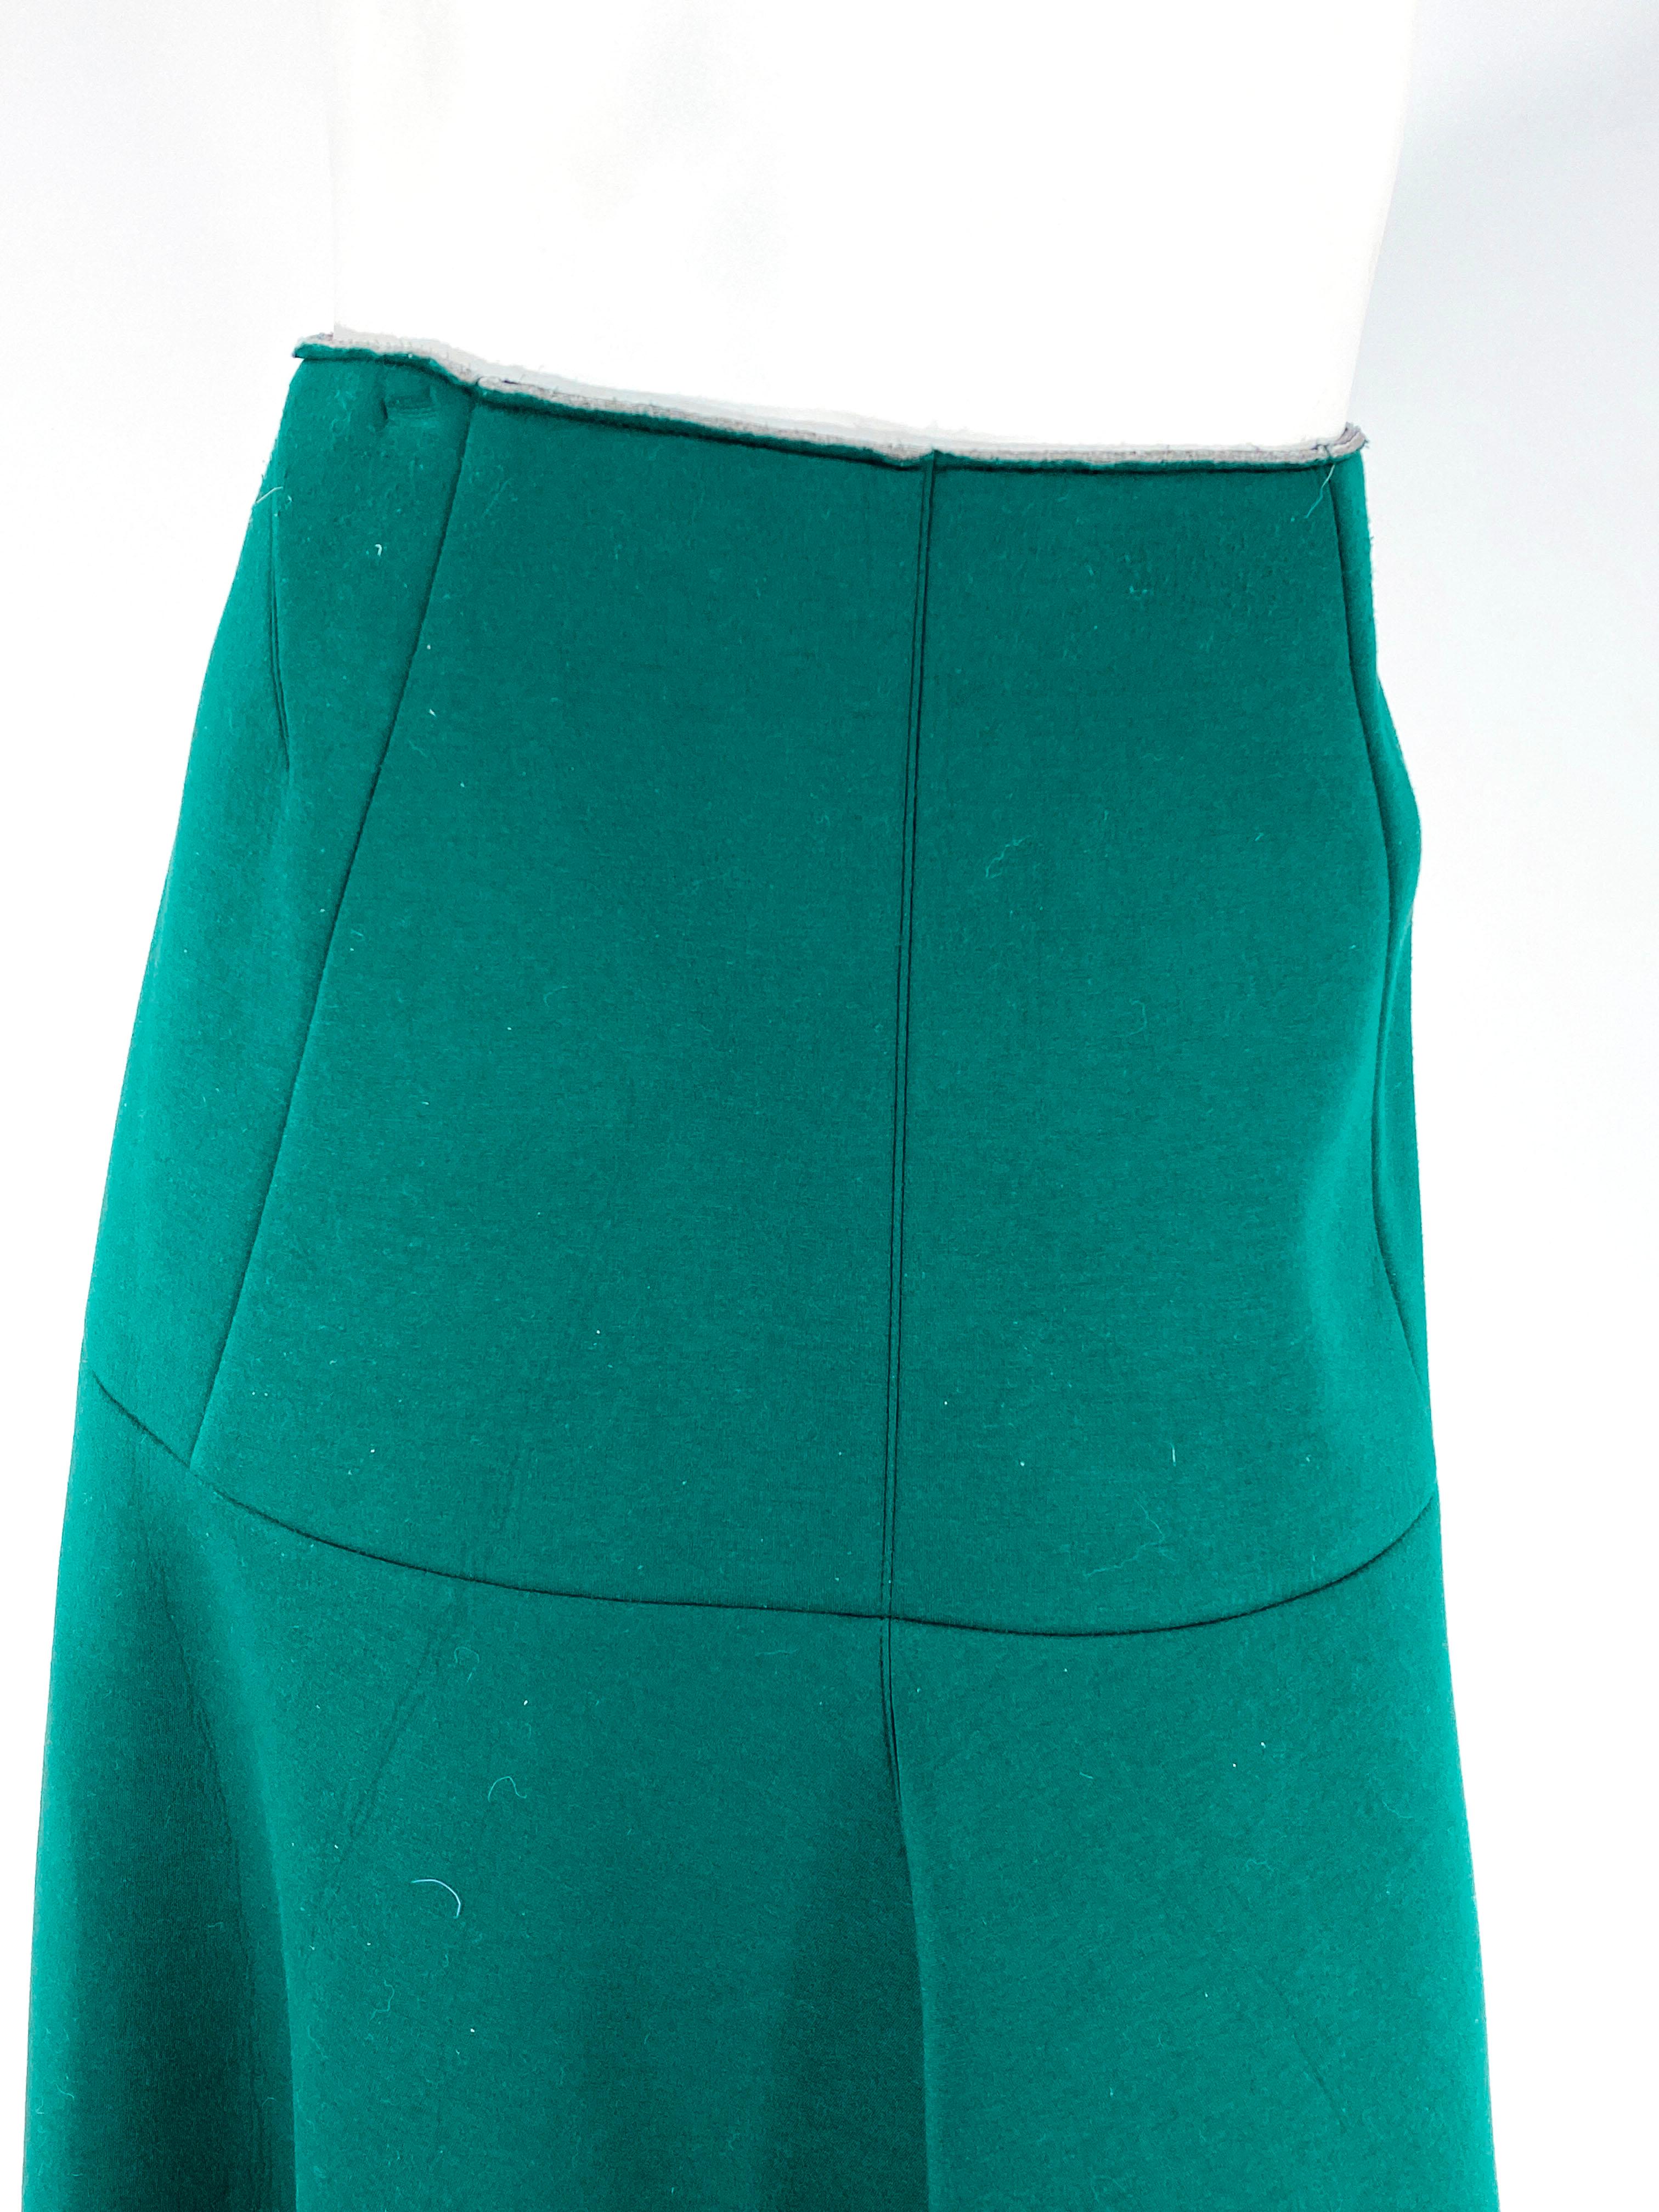 Marni hunter green scuba skirt with a fitted silhouette past the hip going to a full A-line that reaches a traditional tea-length. The hem and the waist band are unfinished with raw cut edges. 